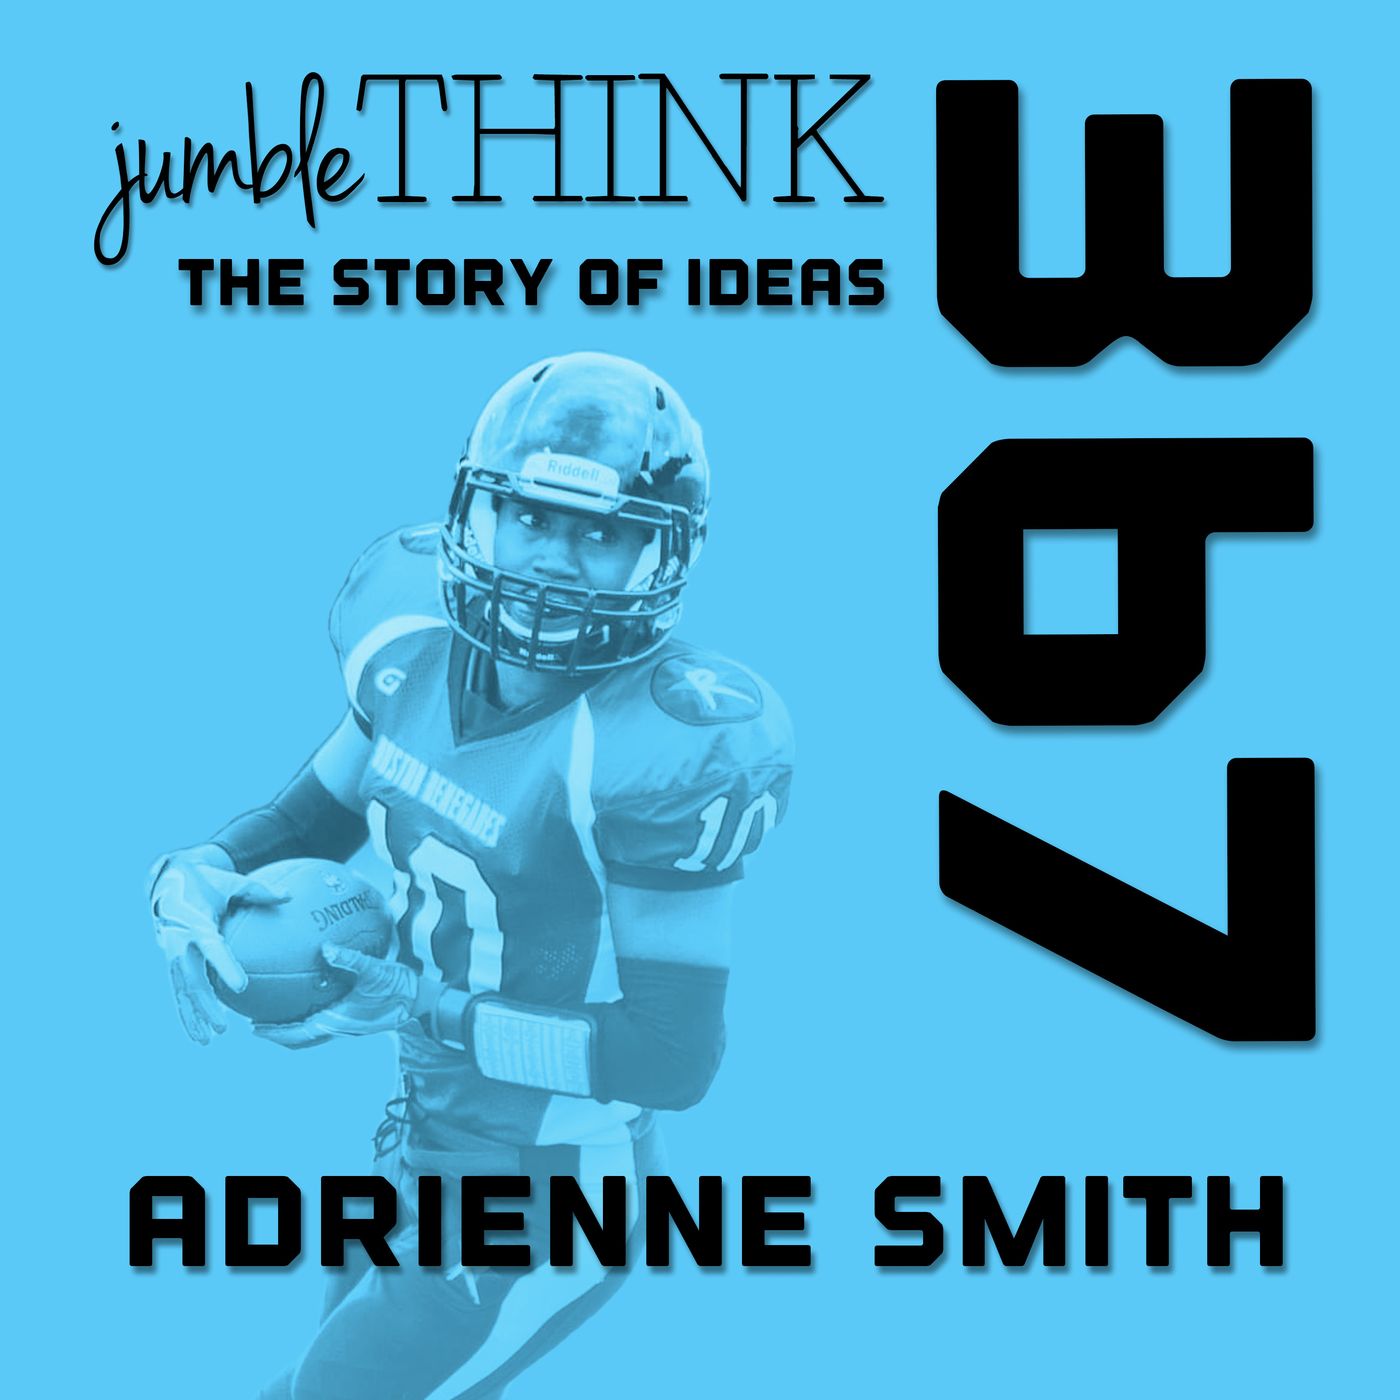 The Life of a Professional Women’s Football Player with Adrienne Smith